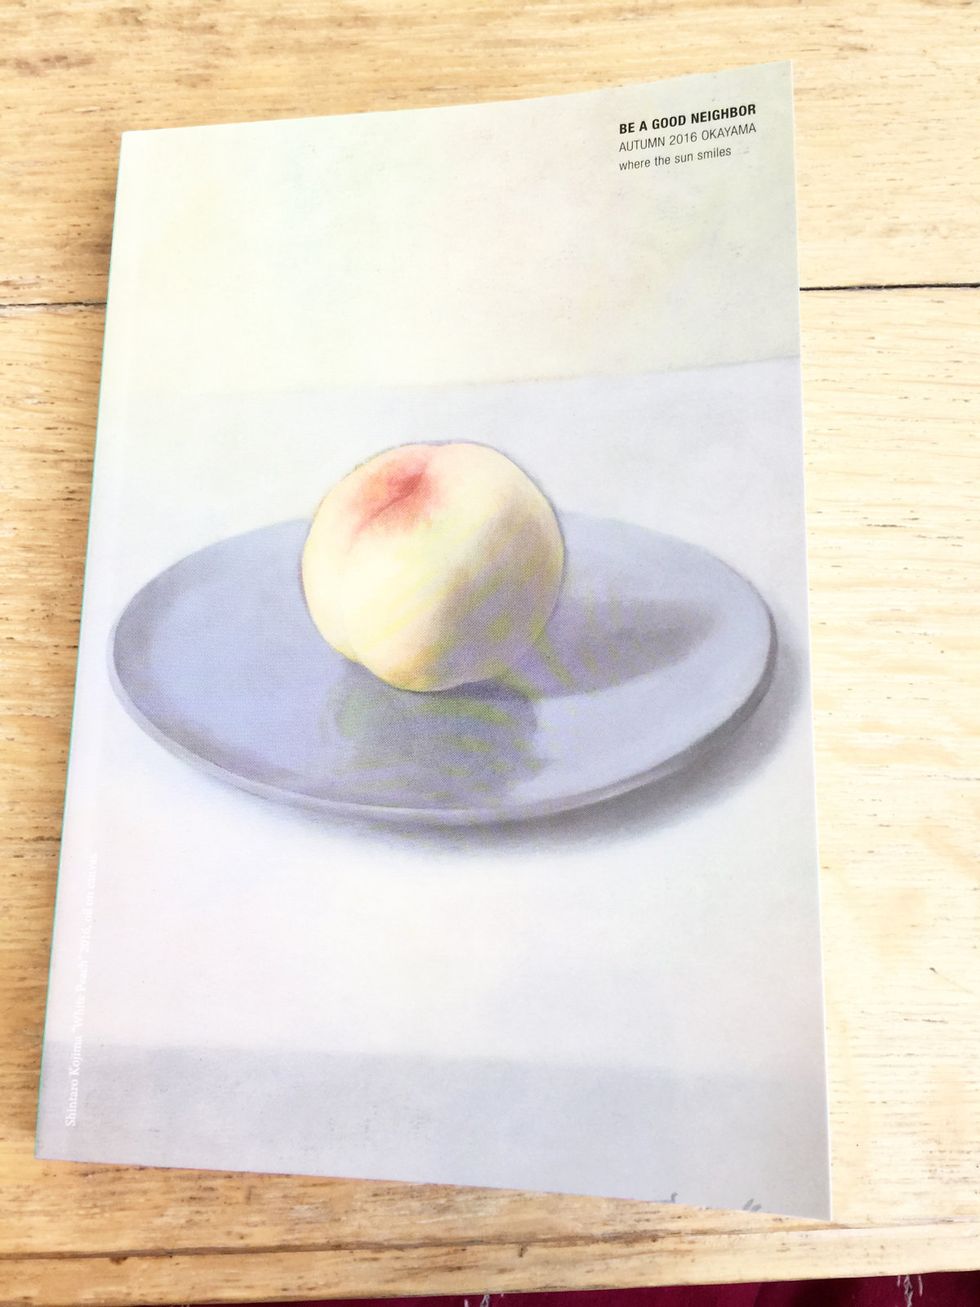 Fruit, Food, Produce, Natural foods, Peach, Serveware, Peach, Paper product, Paper, Still life photography, 